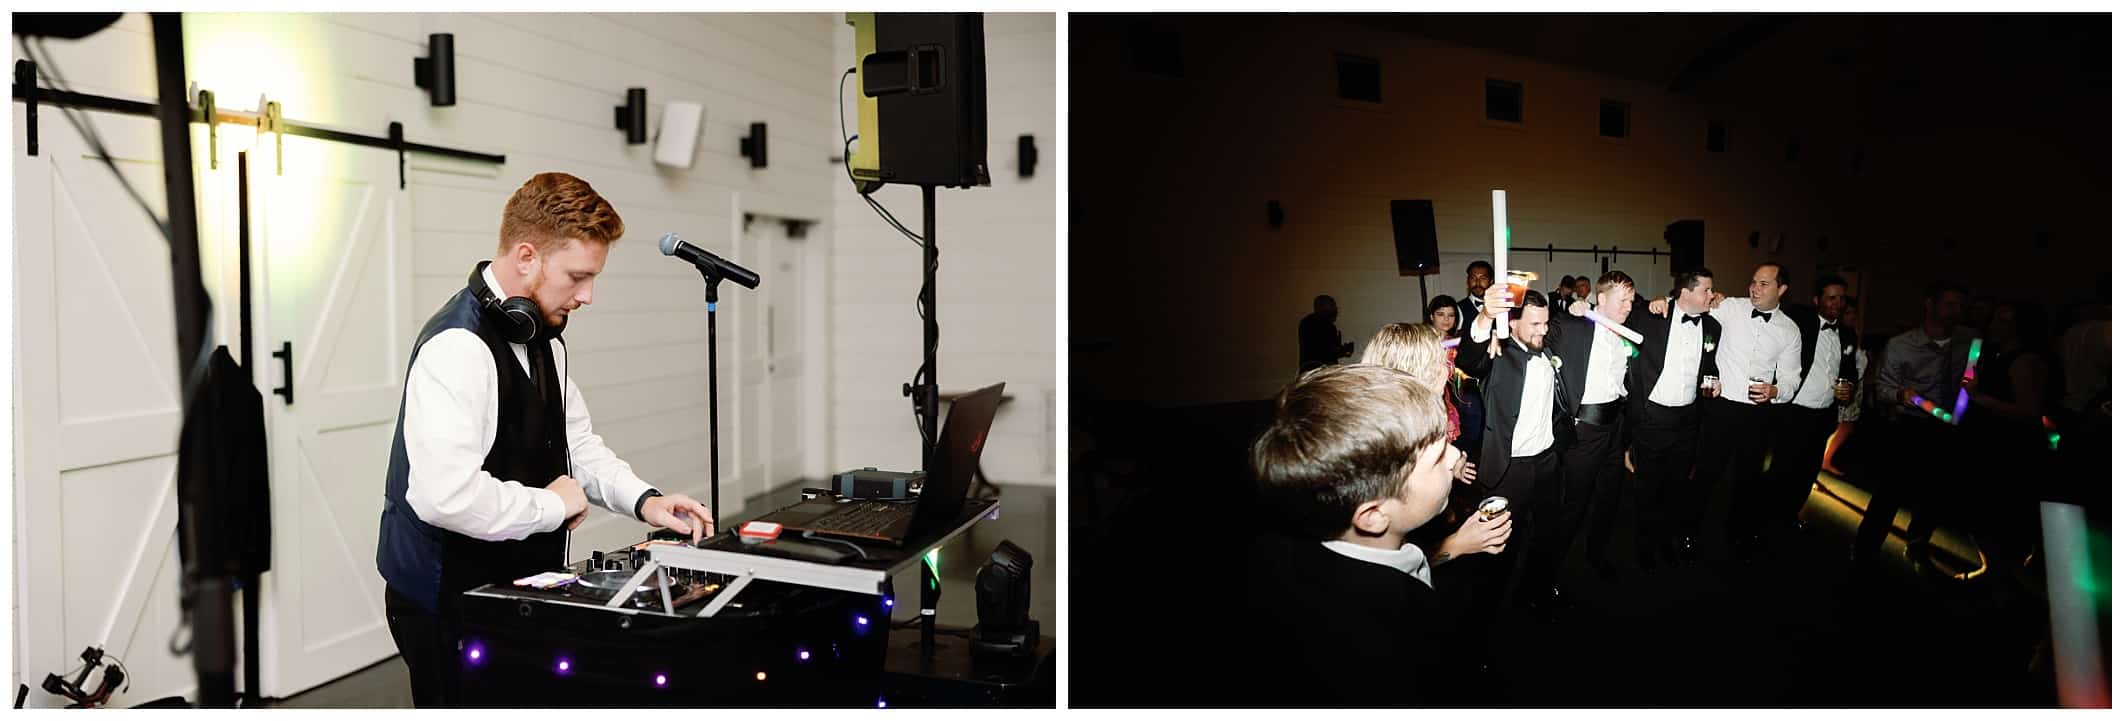 Two pictures of a wedding reception with a dj playing music.